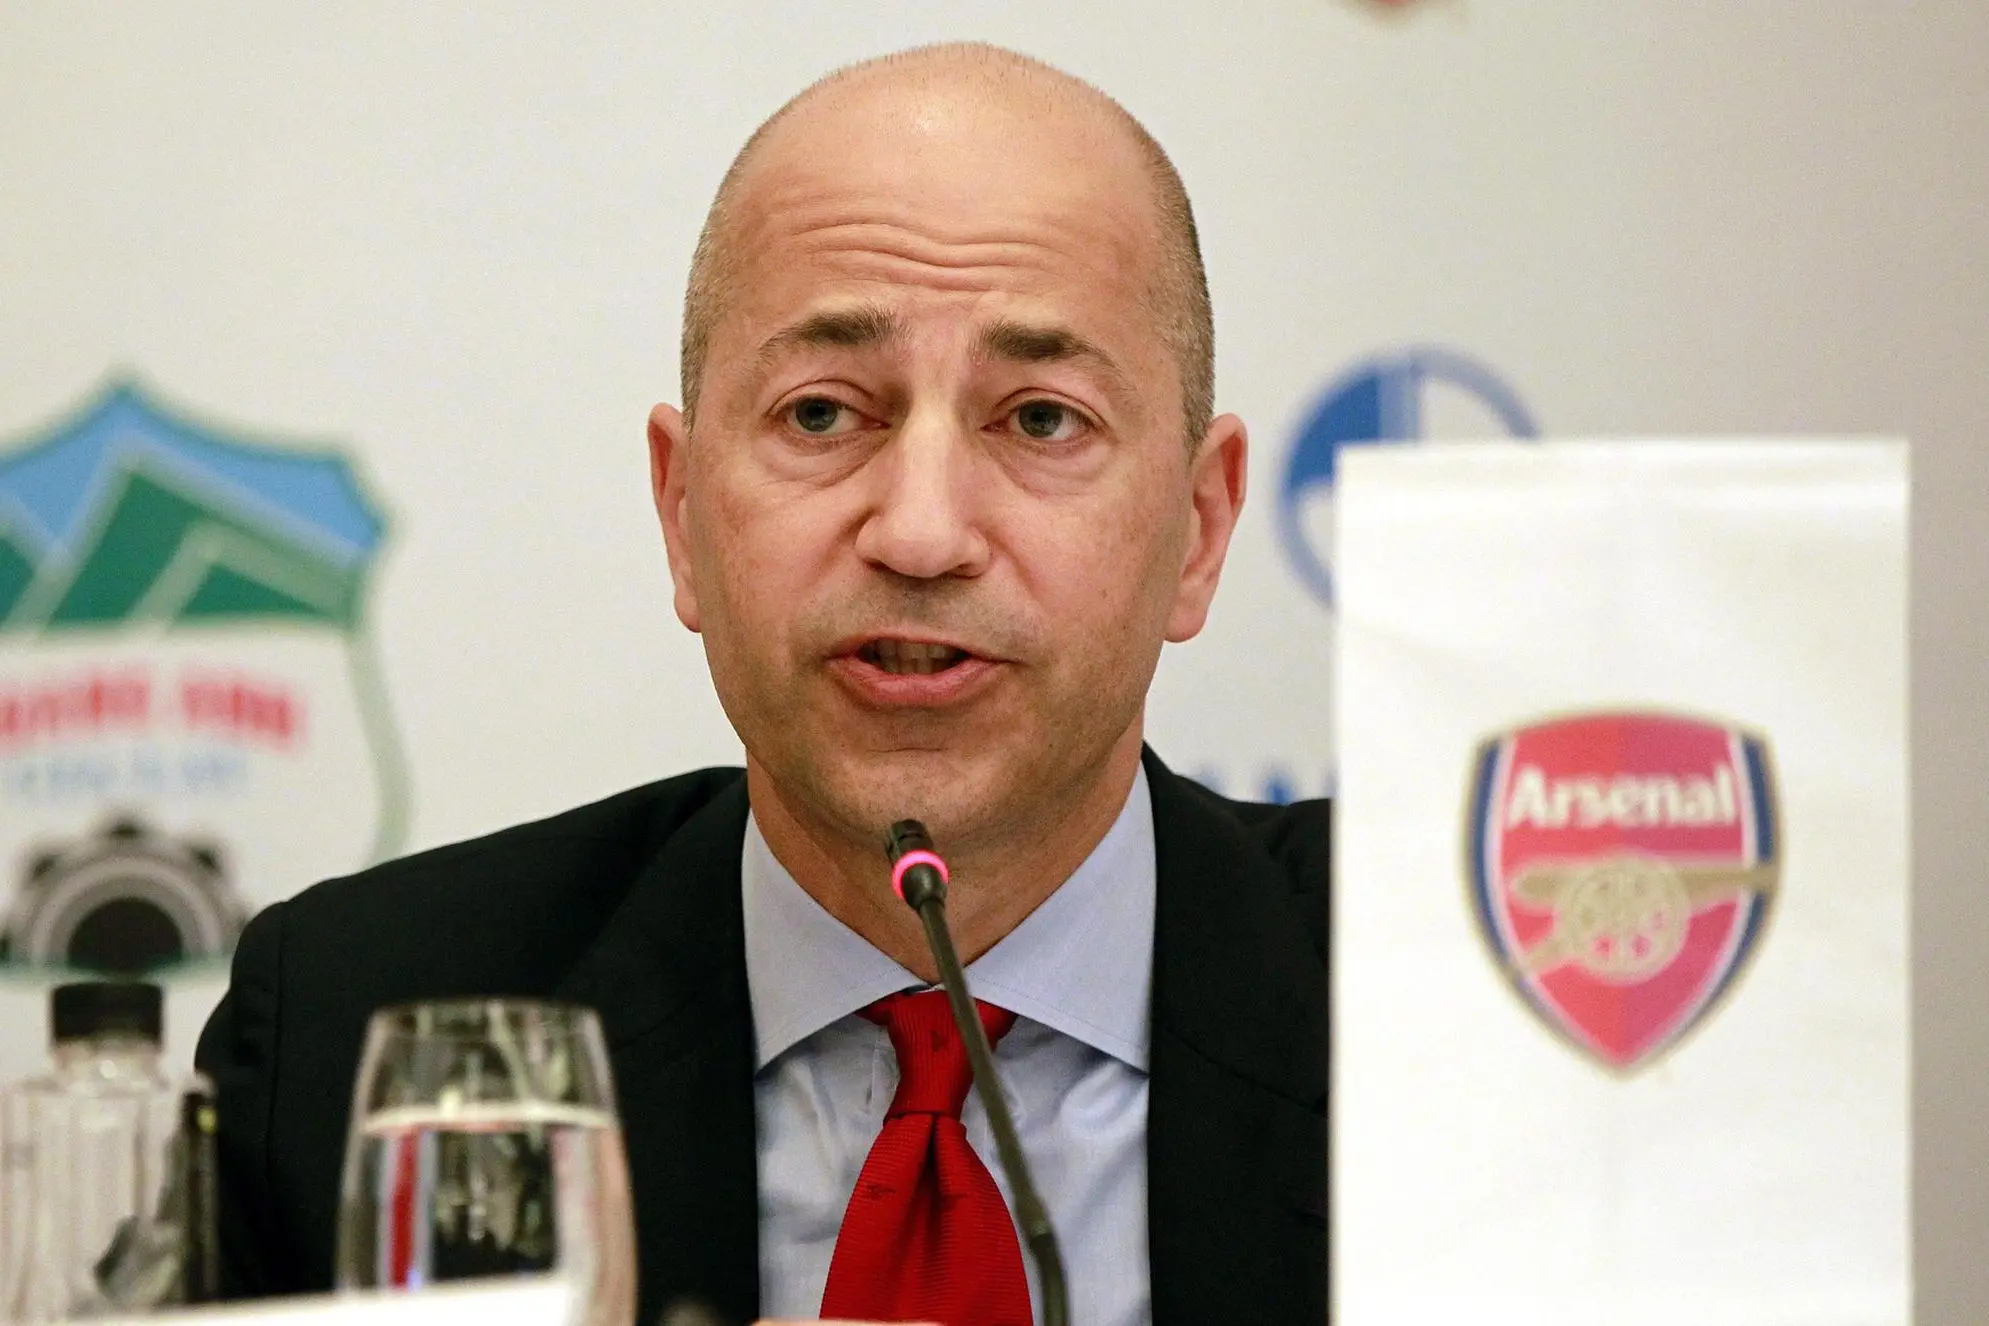 epa03788663 Arsenal chief executive Ivan Gazidis speaks during a press conference in Hanoi, Vietnam 15 July 2013. Arsenal will play a friendly match against Vietnams national team on 17 July 2013. EPA/LUONG THAI LINH